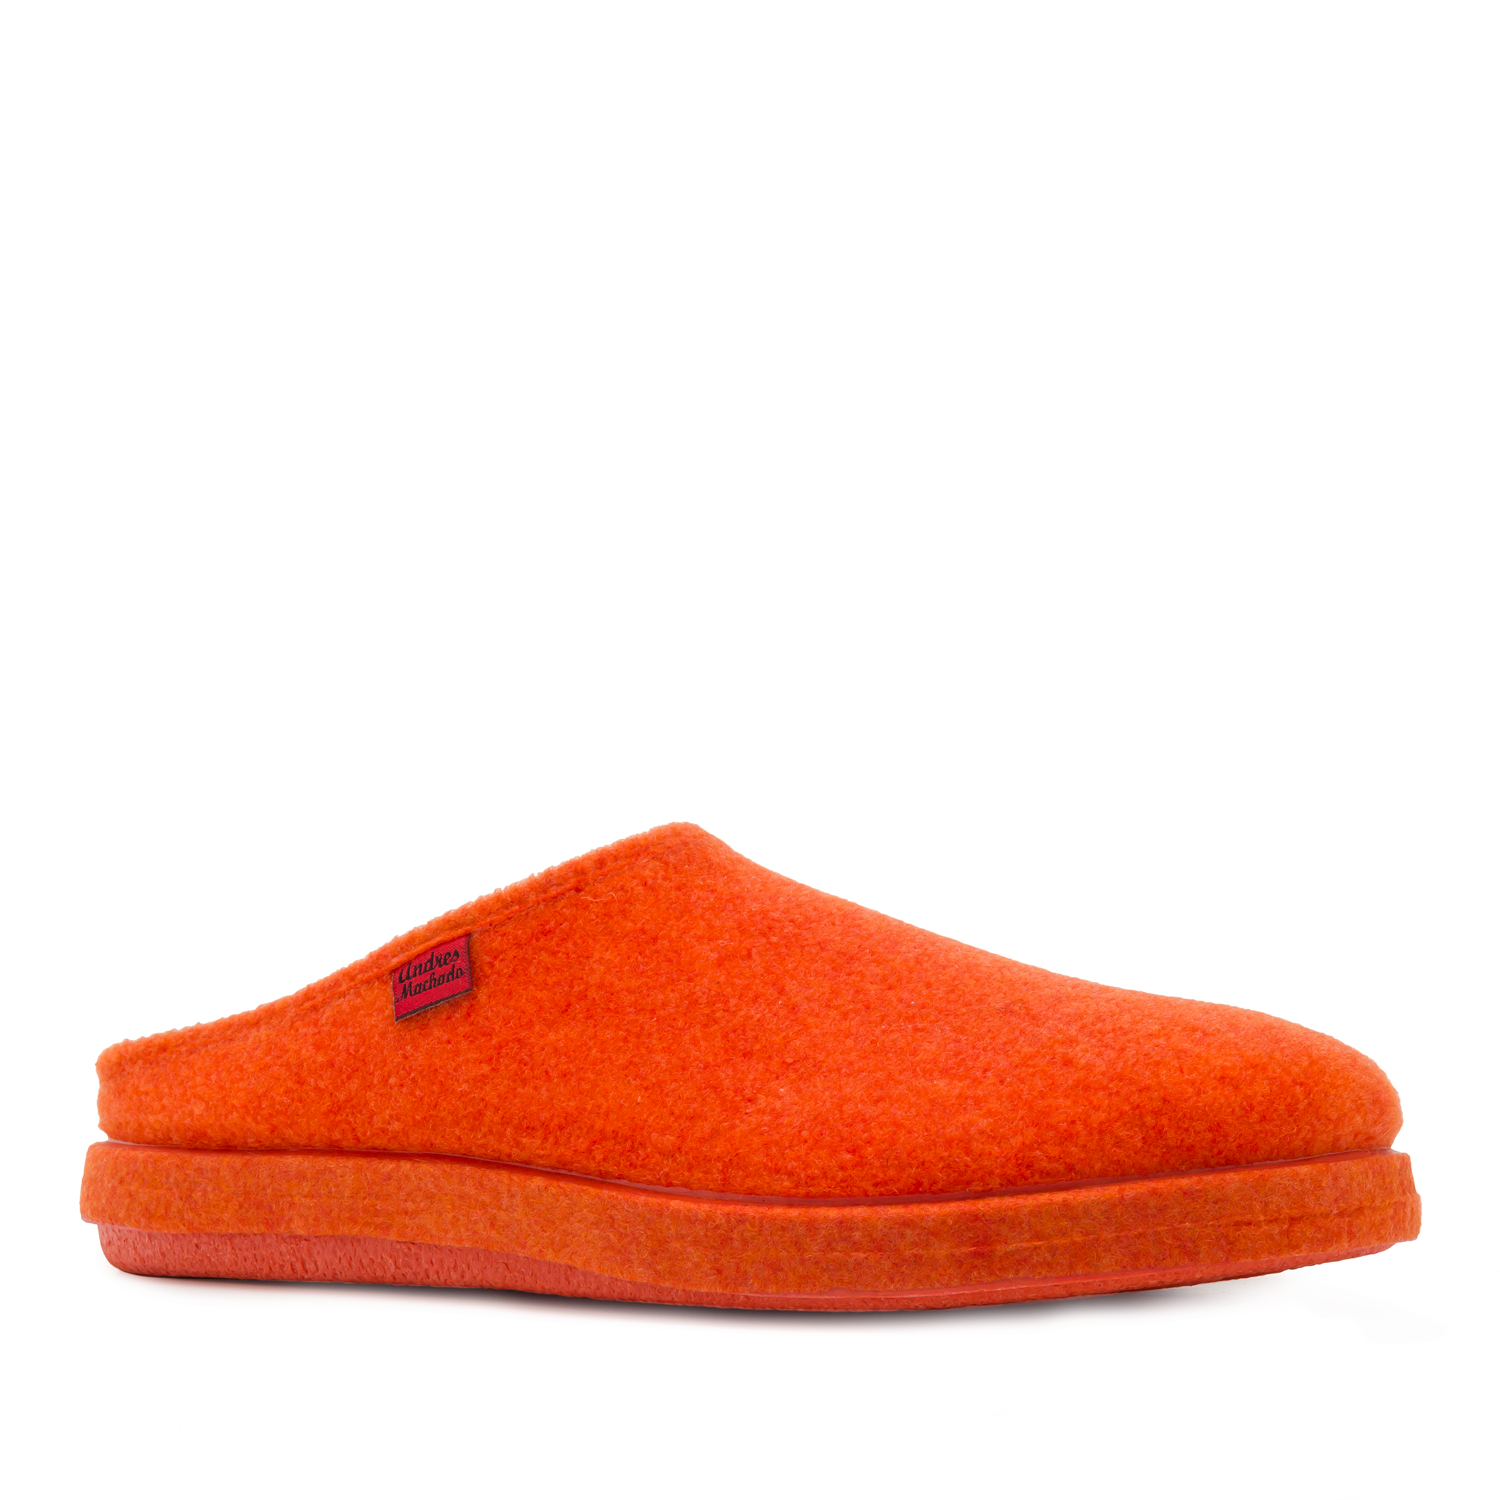 Very comfortable Orange Felt Slippers with footbed 